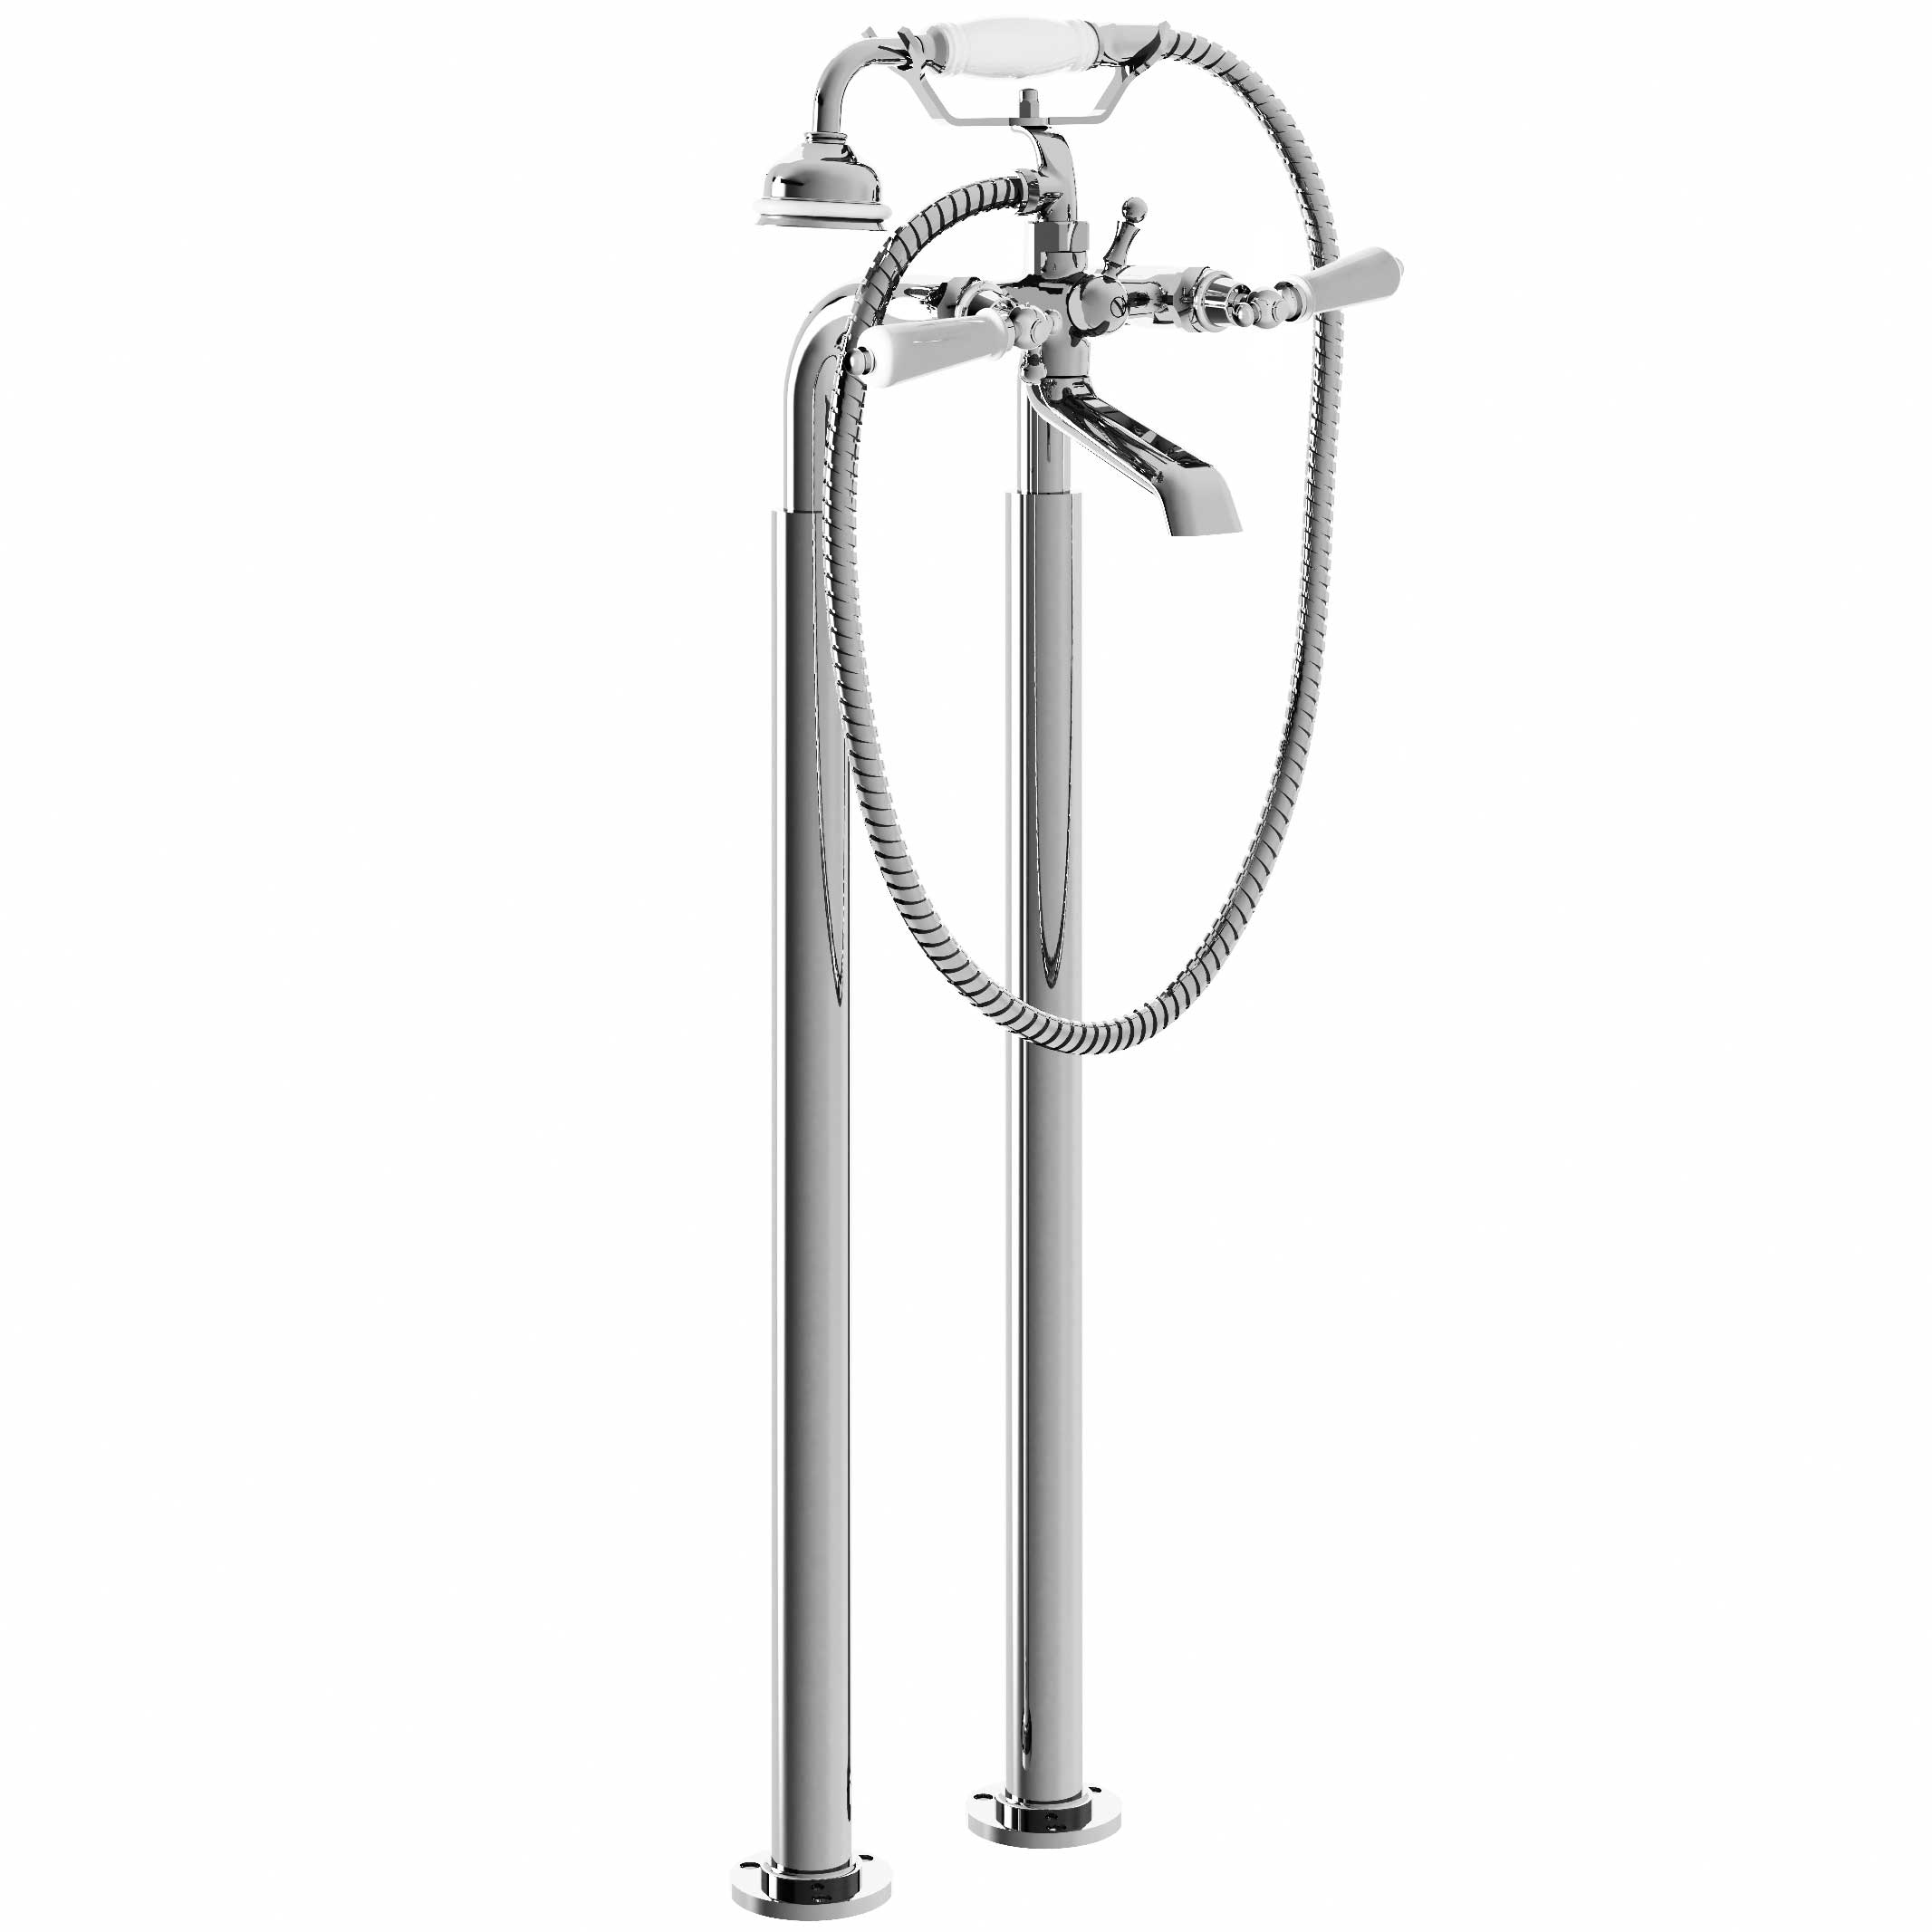 M32-3309 Floor mounted bath and shower mixer